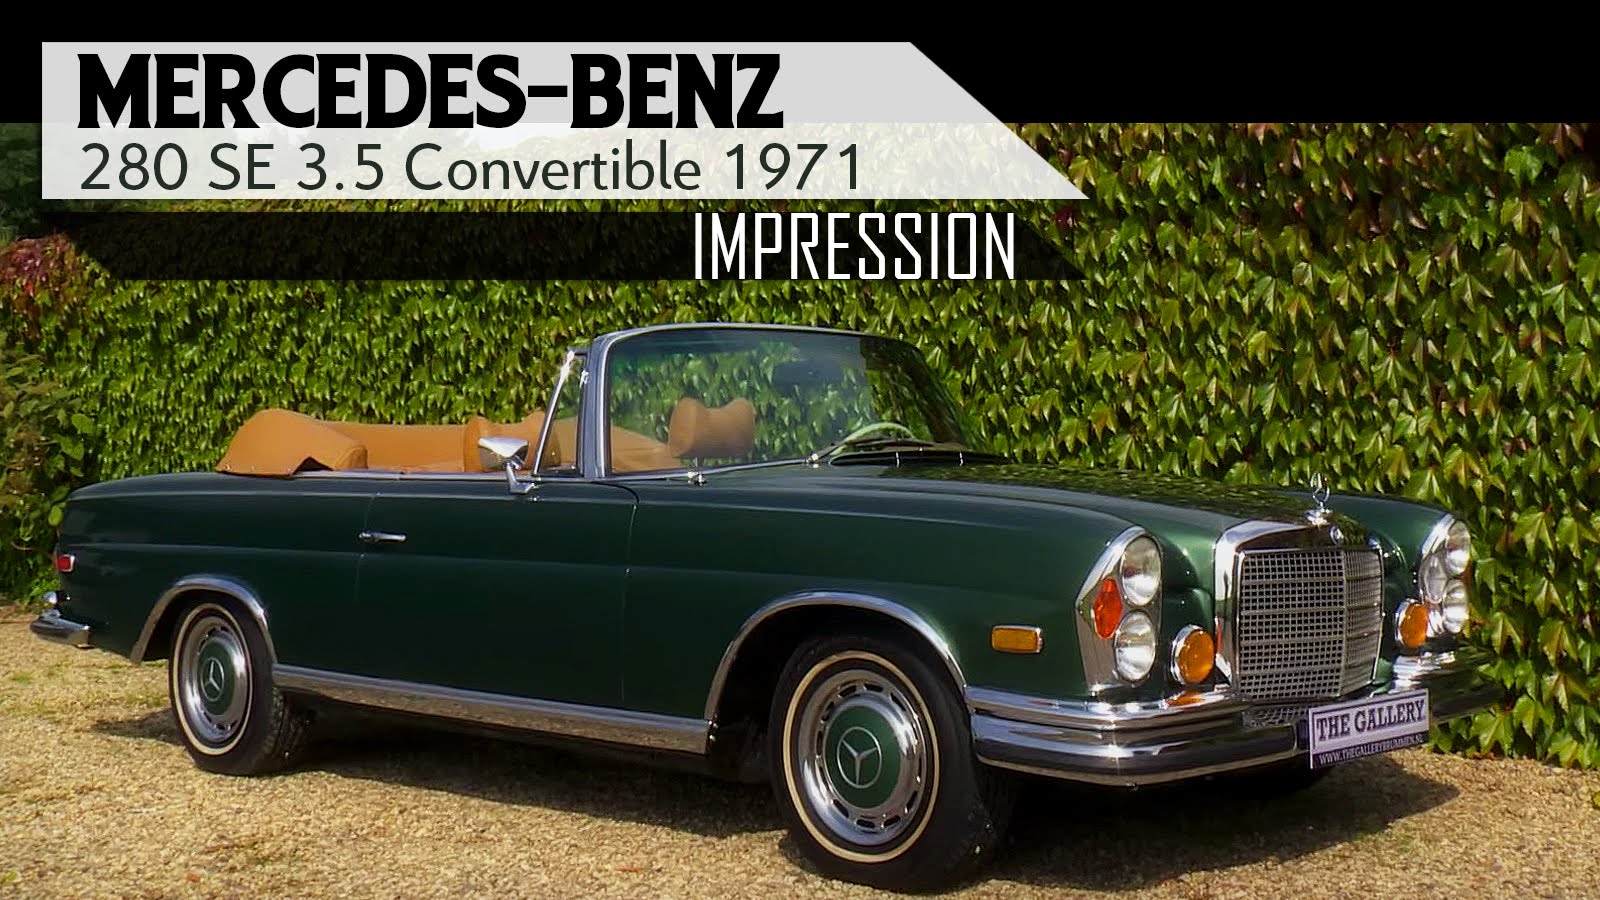 Mercedes-Benz W111 1959 - 1971 Coupe #6